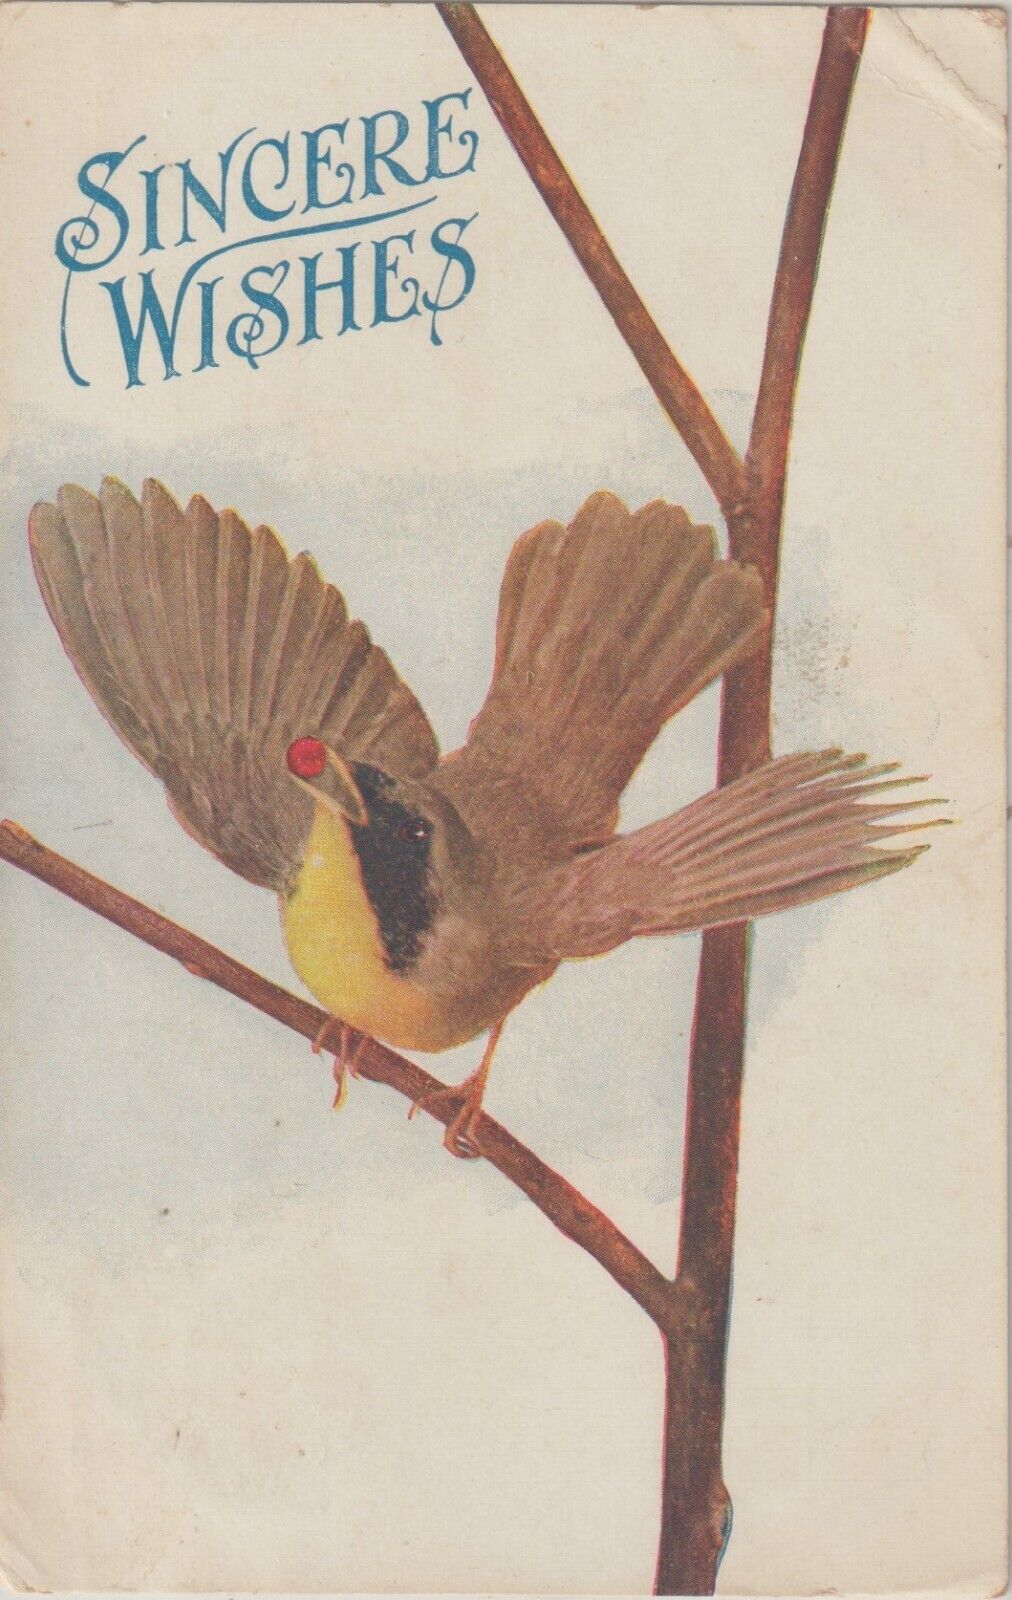 SINCERE WISHES, BIRD ON A BRANCH USED 1909 POST CARD